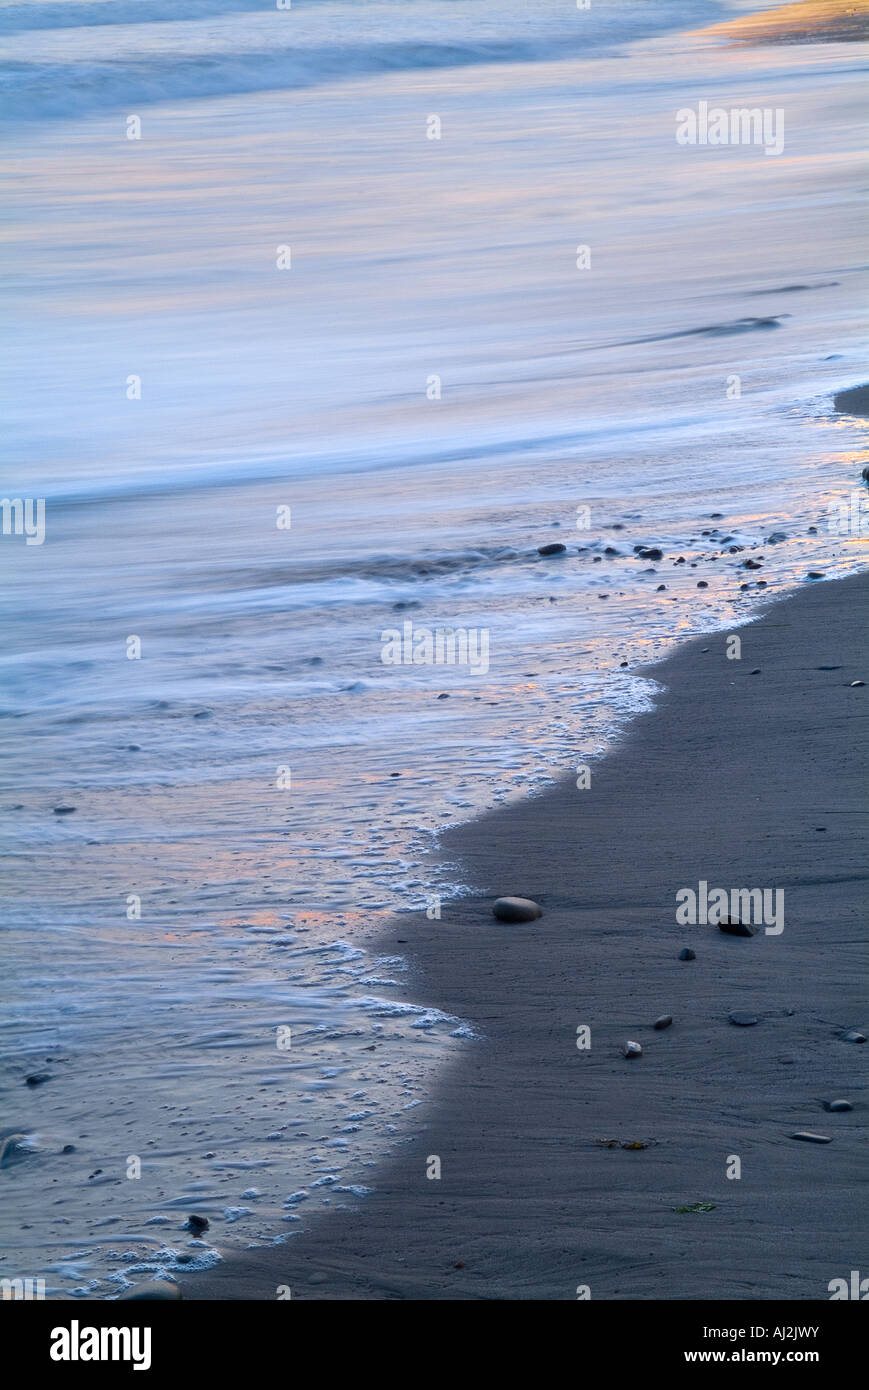 Ocean Wave Detail With Pebbles And Stones At Sunset Stock Photo